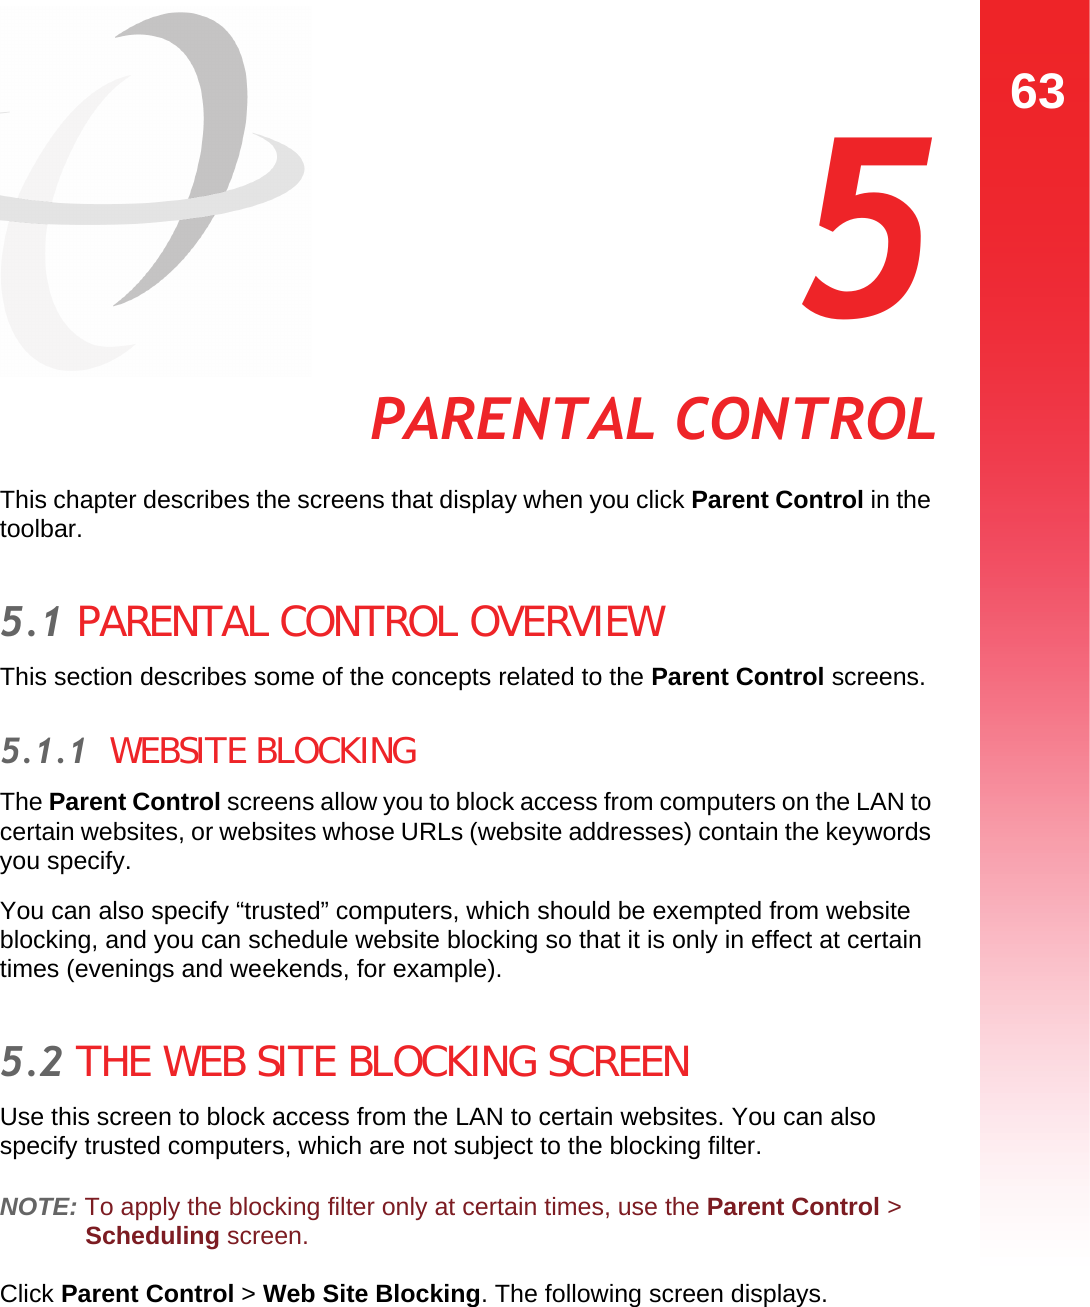 63PARENTAL CONTROL  5 PARENTAL CONTROLThis chapter describes the screens that display when you click Parent Control in the toolbar.5.1 PARENTAL CONTROL OVERVIEWThis section describes some of the concepts related to the Parent Control screens.5.1.1  WEBSITE BLOCKINGThe Parent Control screens allow you to block access from computers on the LAN to certain websites, or websites whose URLs (website addresses) contain the keywords you specify.You can also specify “trusted” computers, which should be exempted from website blocking, and you can schedule website blocking so that it is only in effect at certain times (evenings and weekends, for example).5.2 THE WEB SITE BLOCKING SCREENUse this screen to block access from the LAN to certain websites. You can also specify trusted computers, which are not subject to the blocking filter.NOTE: To apply the blocking filter only at certain times, use the Parent Control &gt; Scheduling screen.Click Parent Control &gt; Web Site Blocking. The following screen displays.